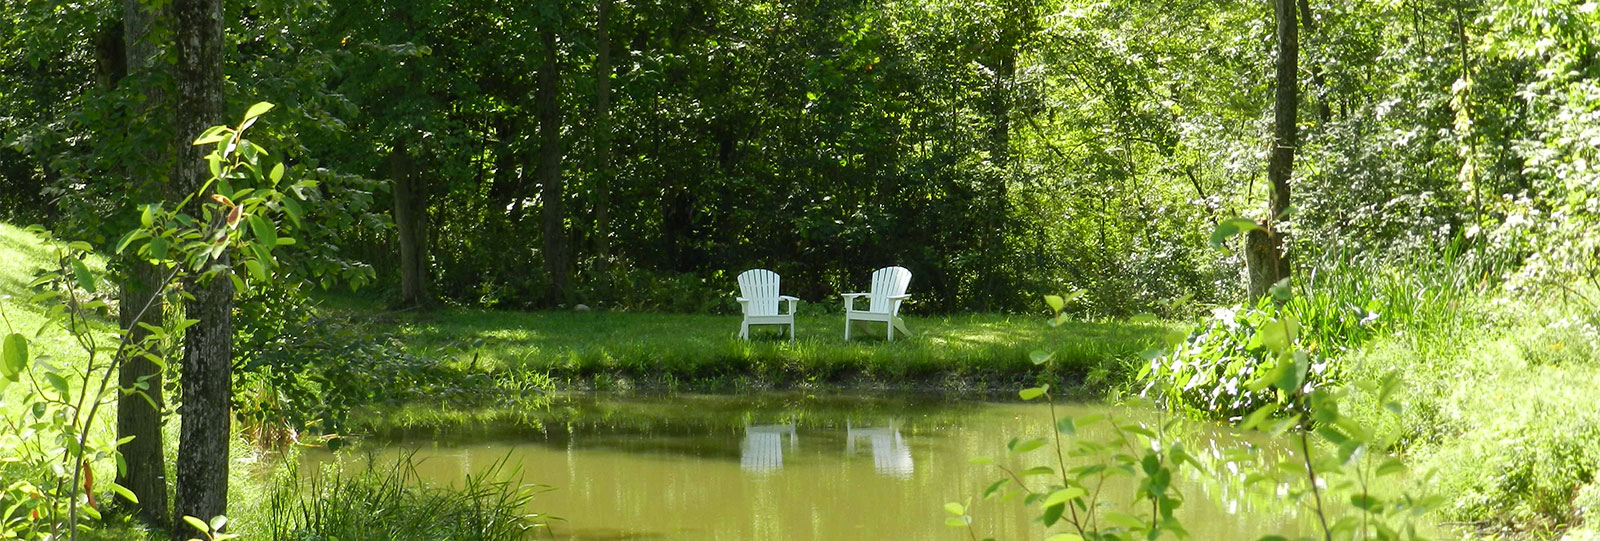 Calming pond of Water with two white chairs